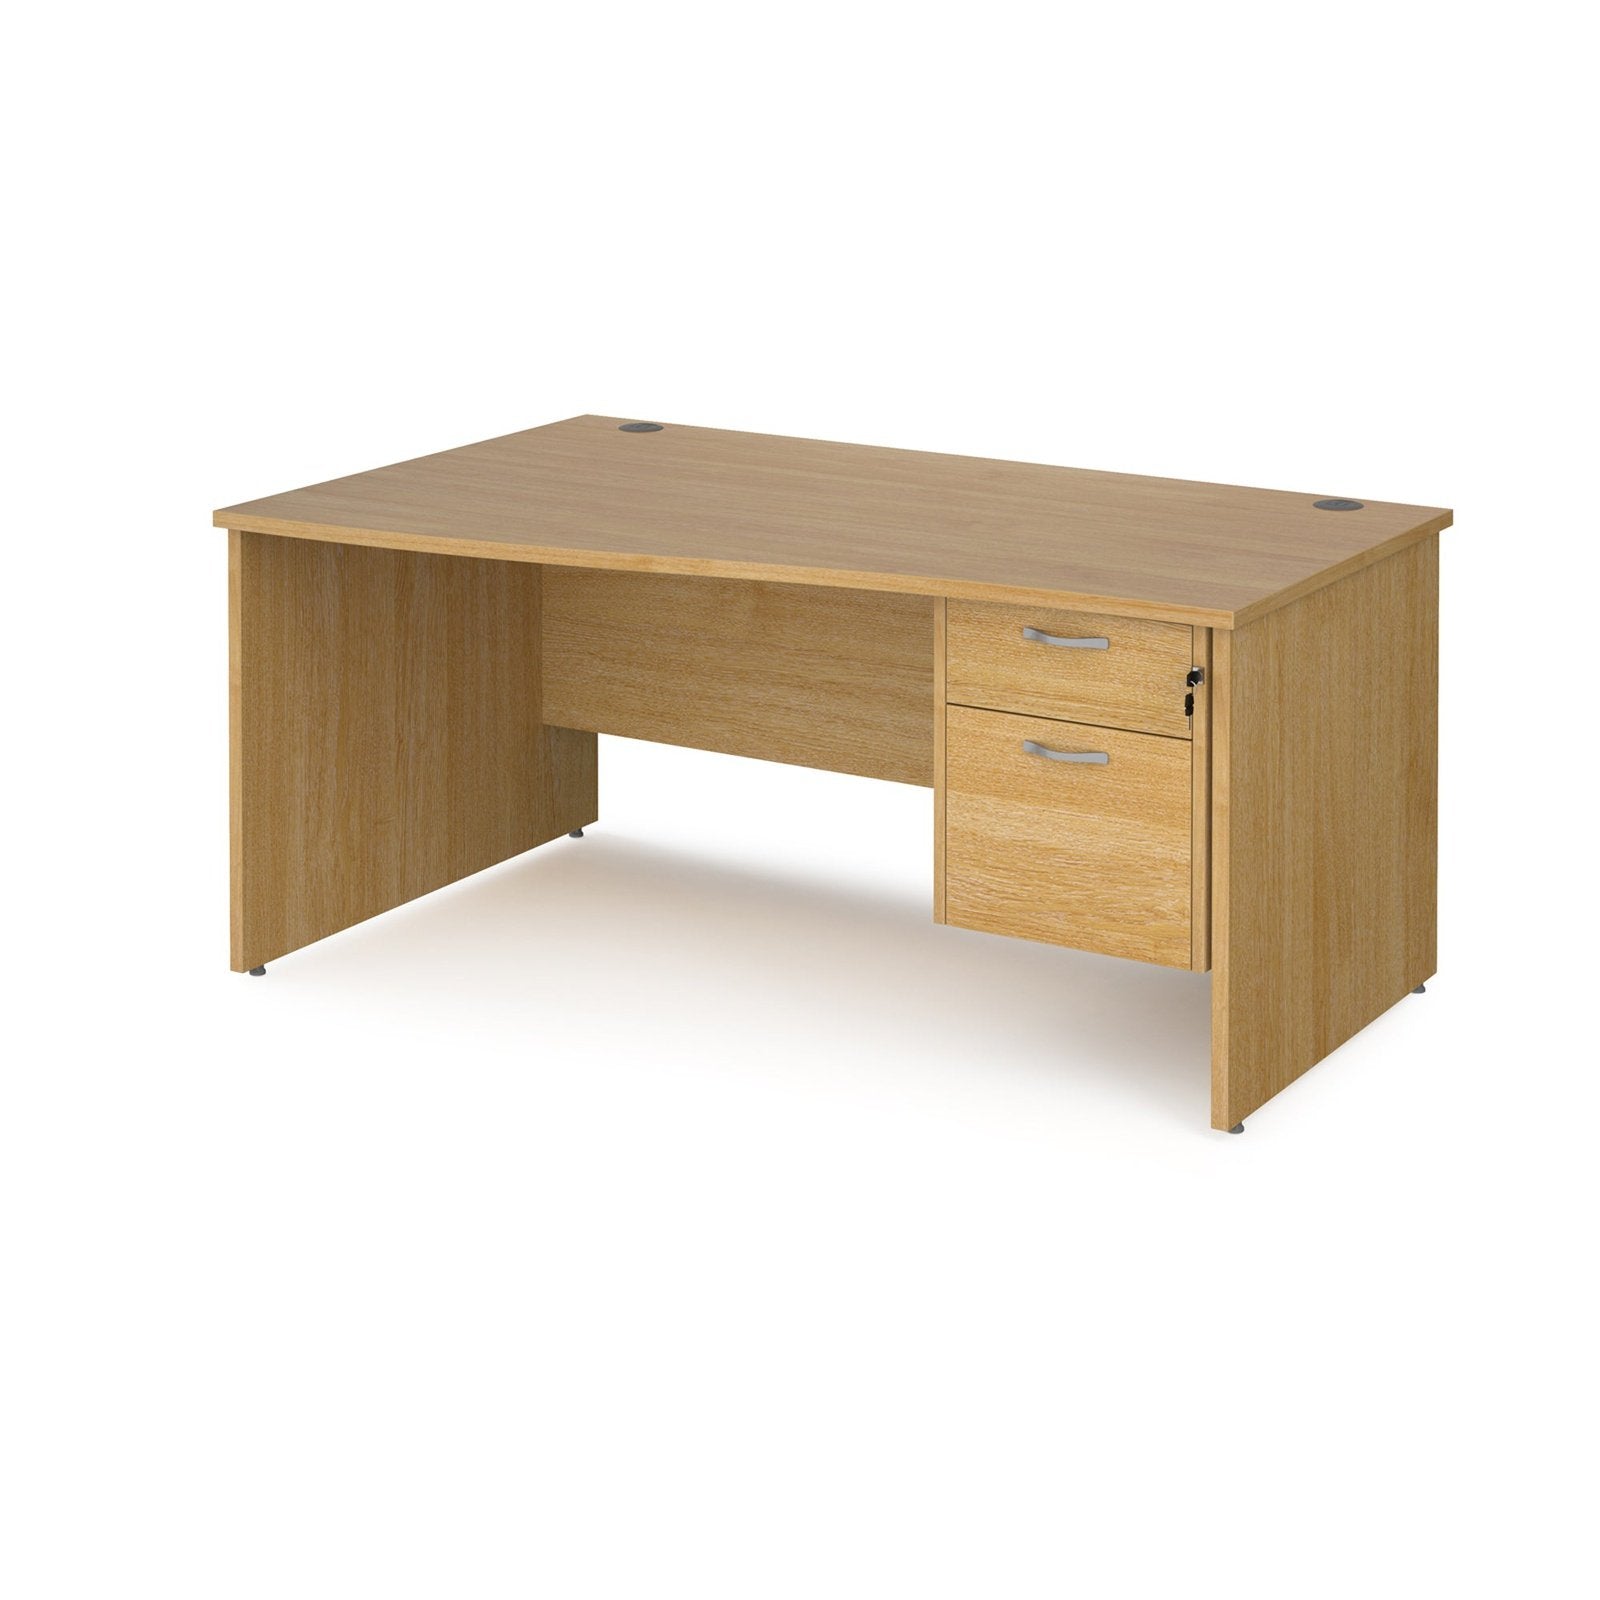 Maestro 25 panel leg left hand wave desk with 2 drawer pedestal - Office Products Online